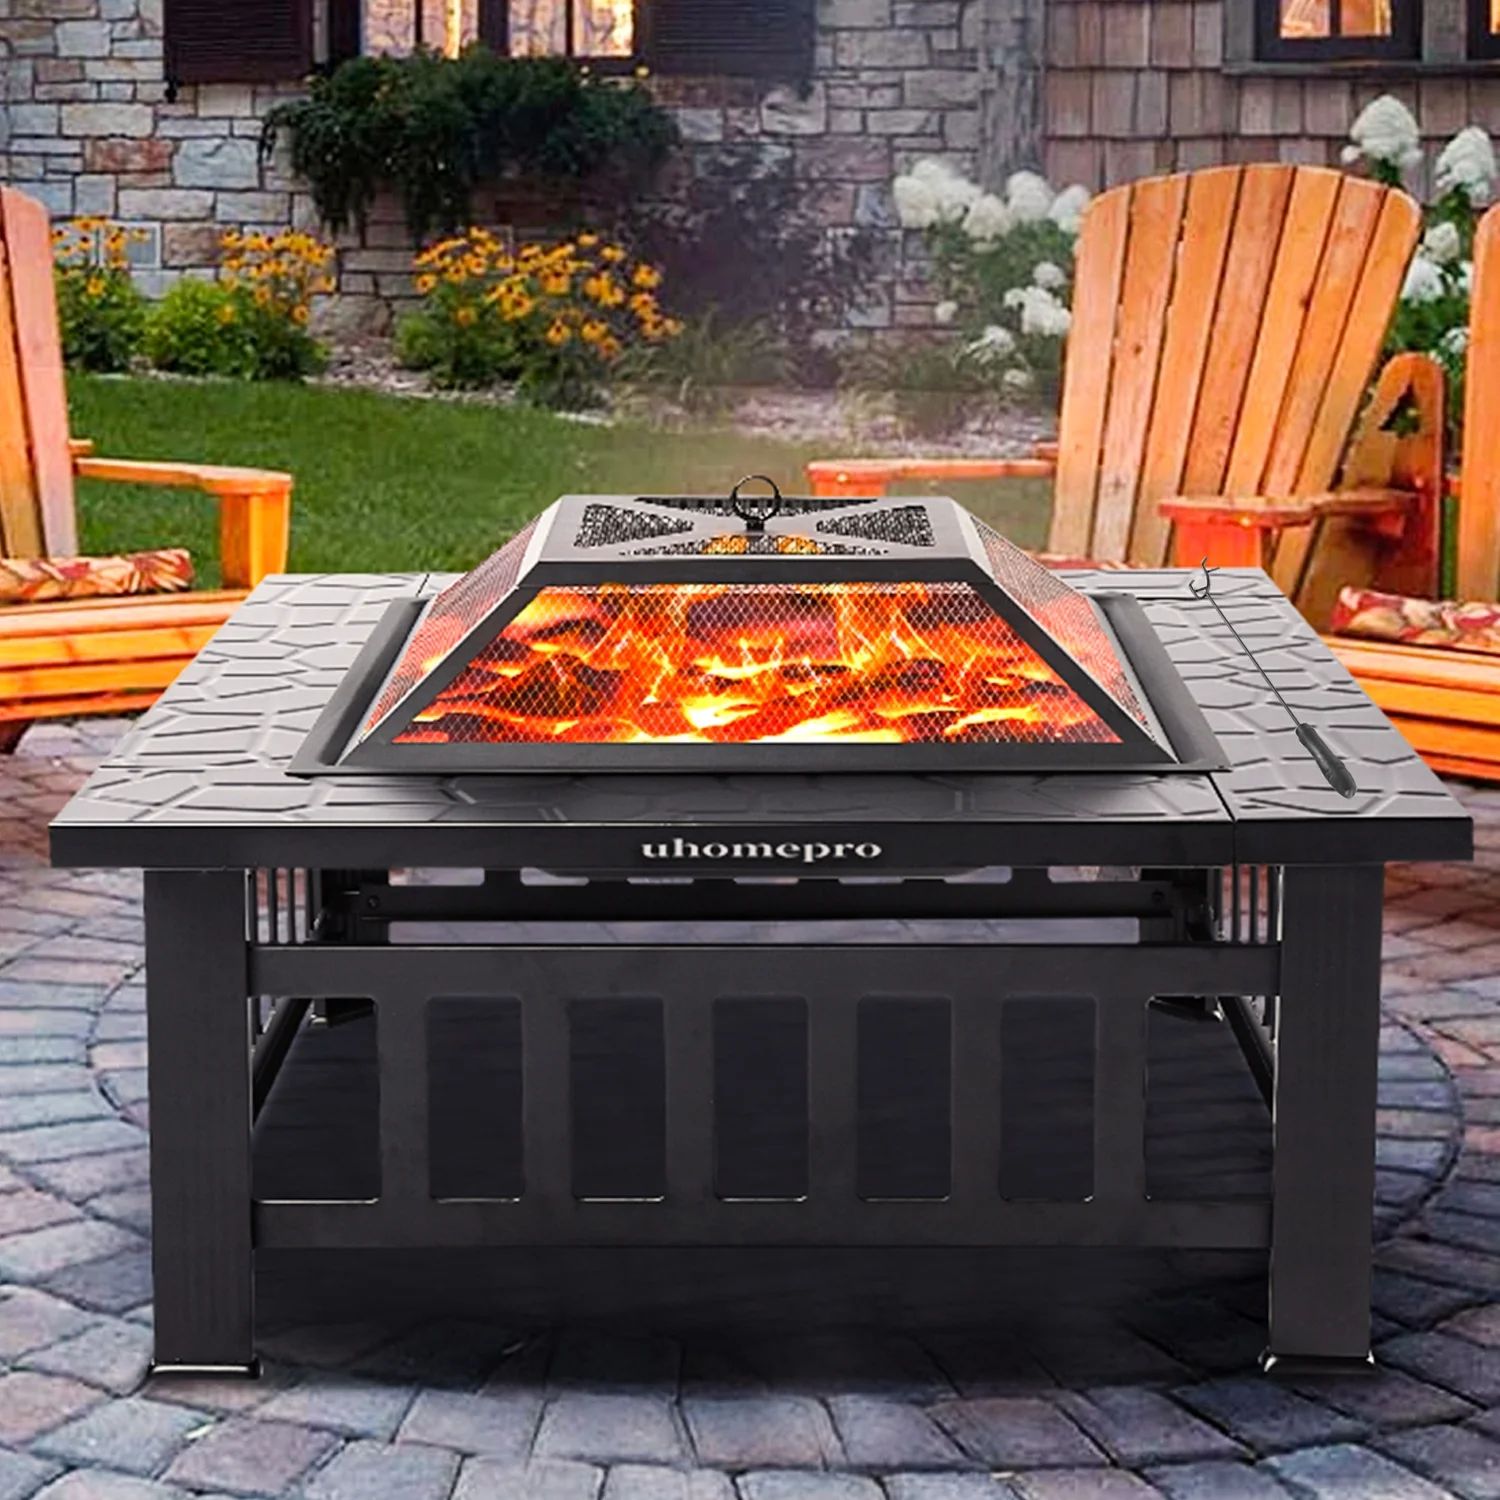 Fire Pits for Outside, 32" Wood Burning Fire Pit Tables with Screen Lid, Poker, BBQ Net, Ice Tray... | Walmart (US)